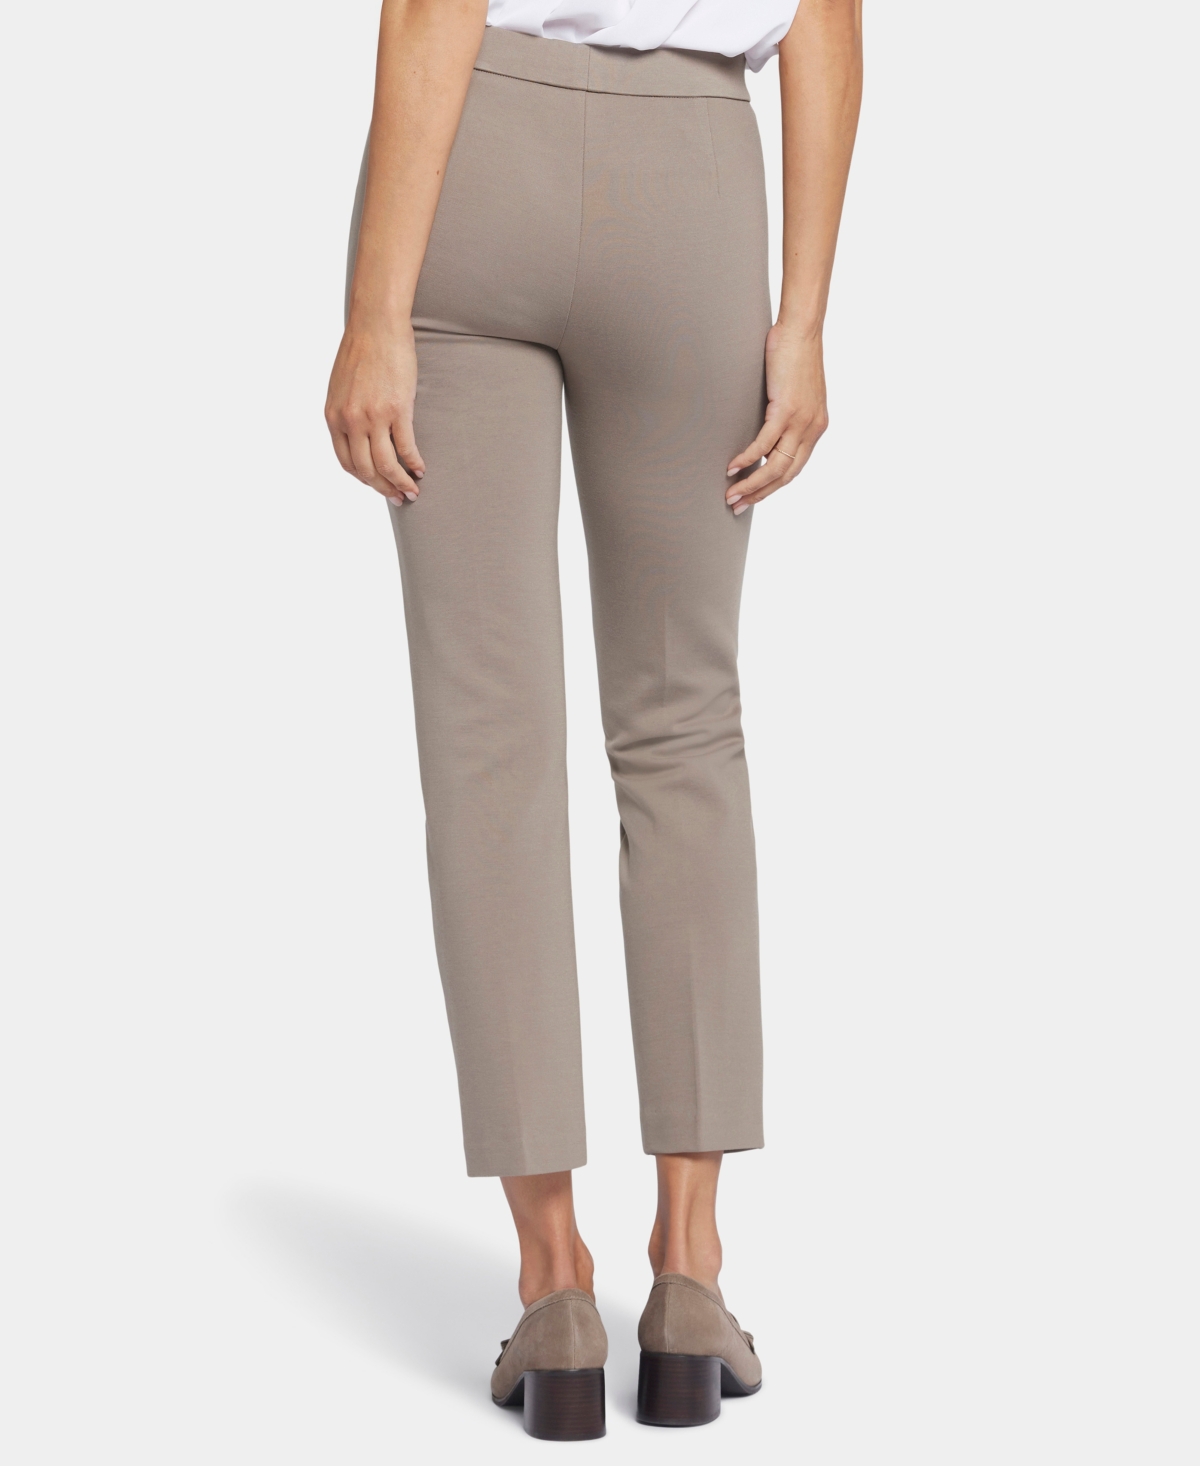 Shop Nydj Women's Pull On Slim Ankle Trouser Pants In Saddlewood